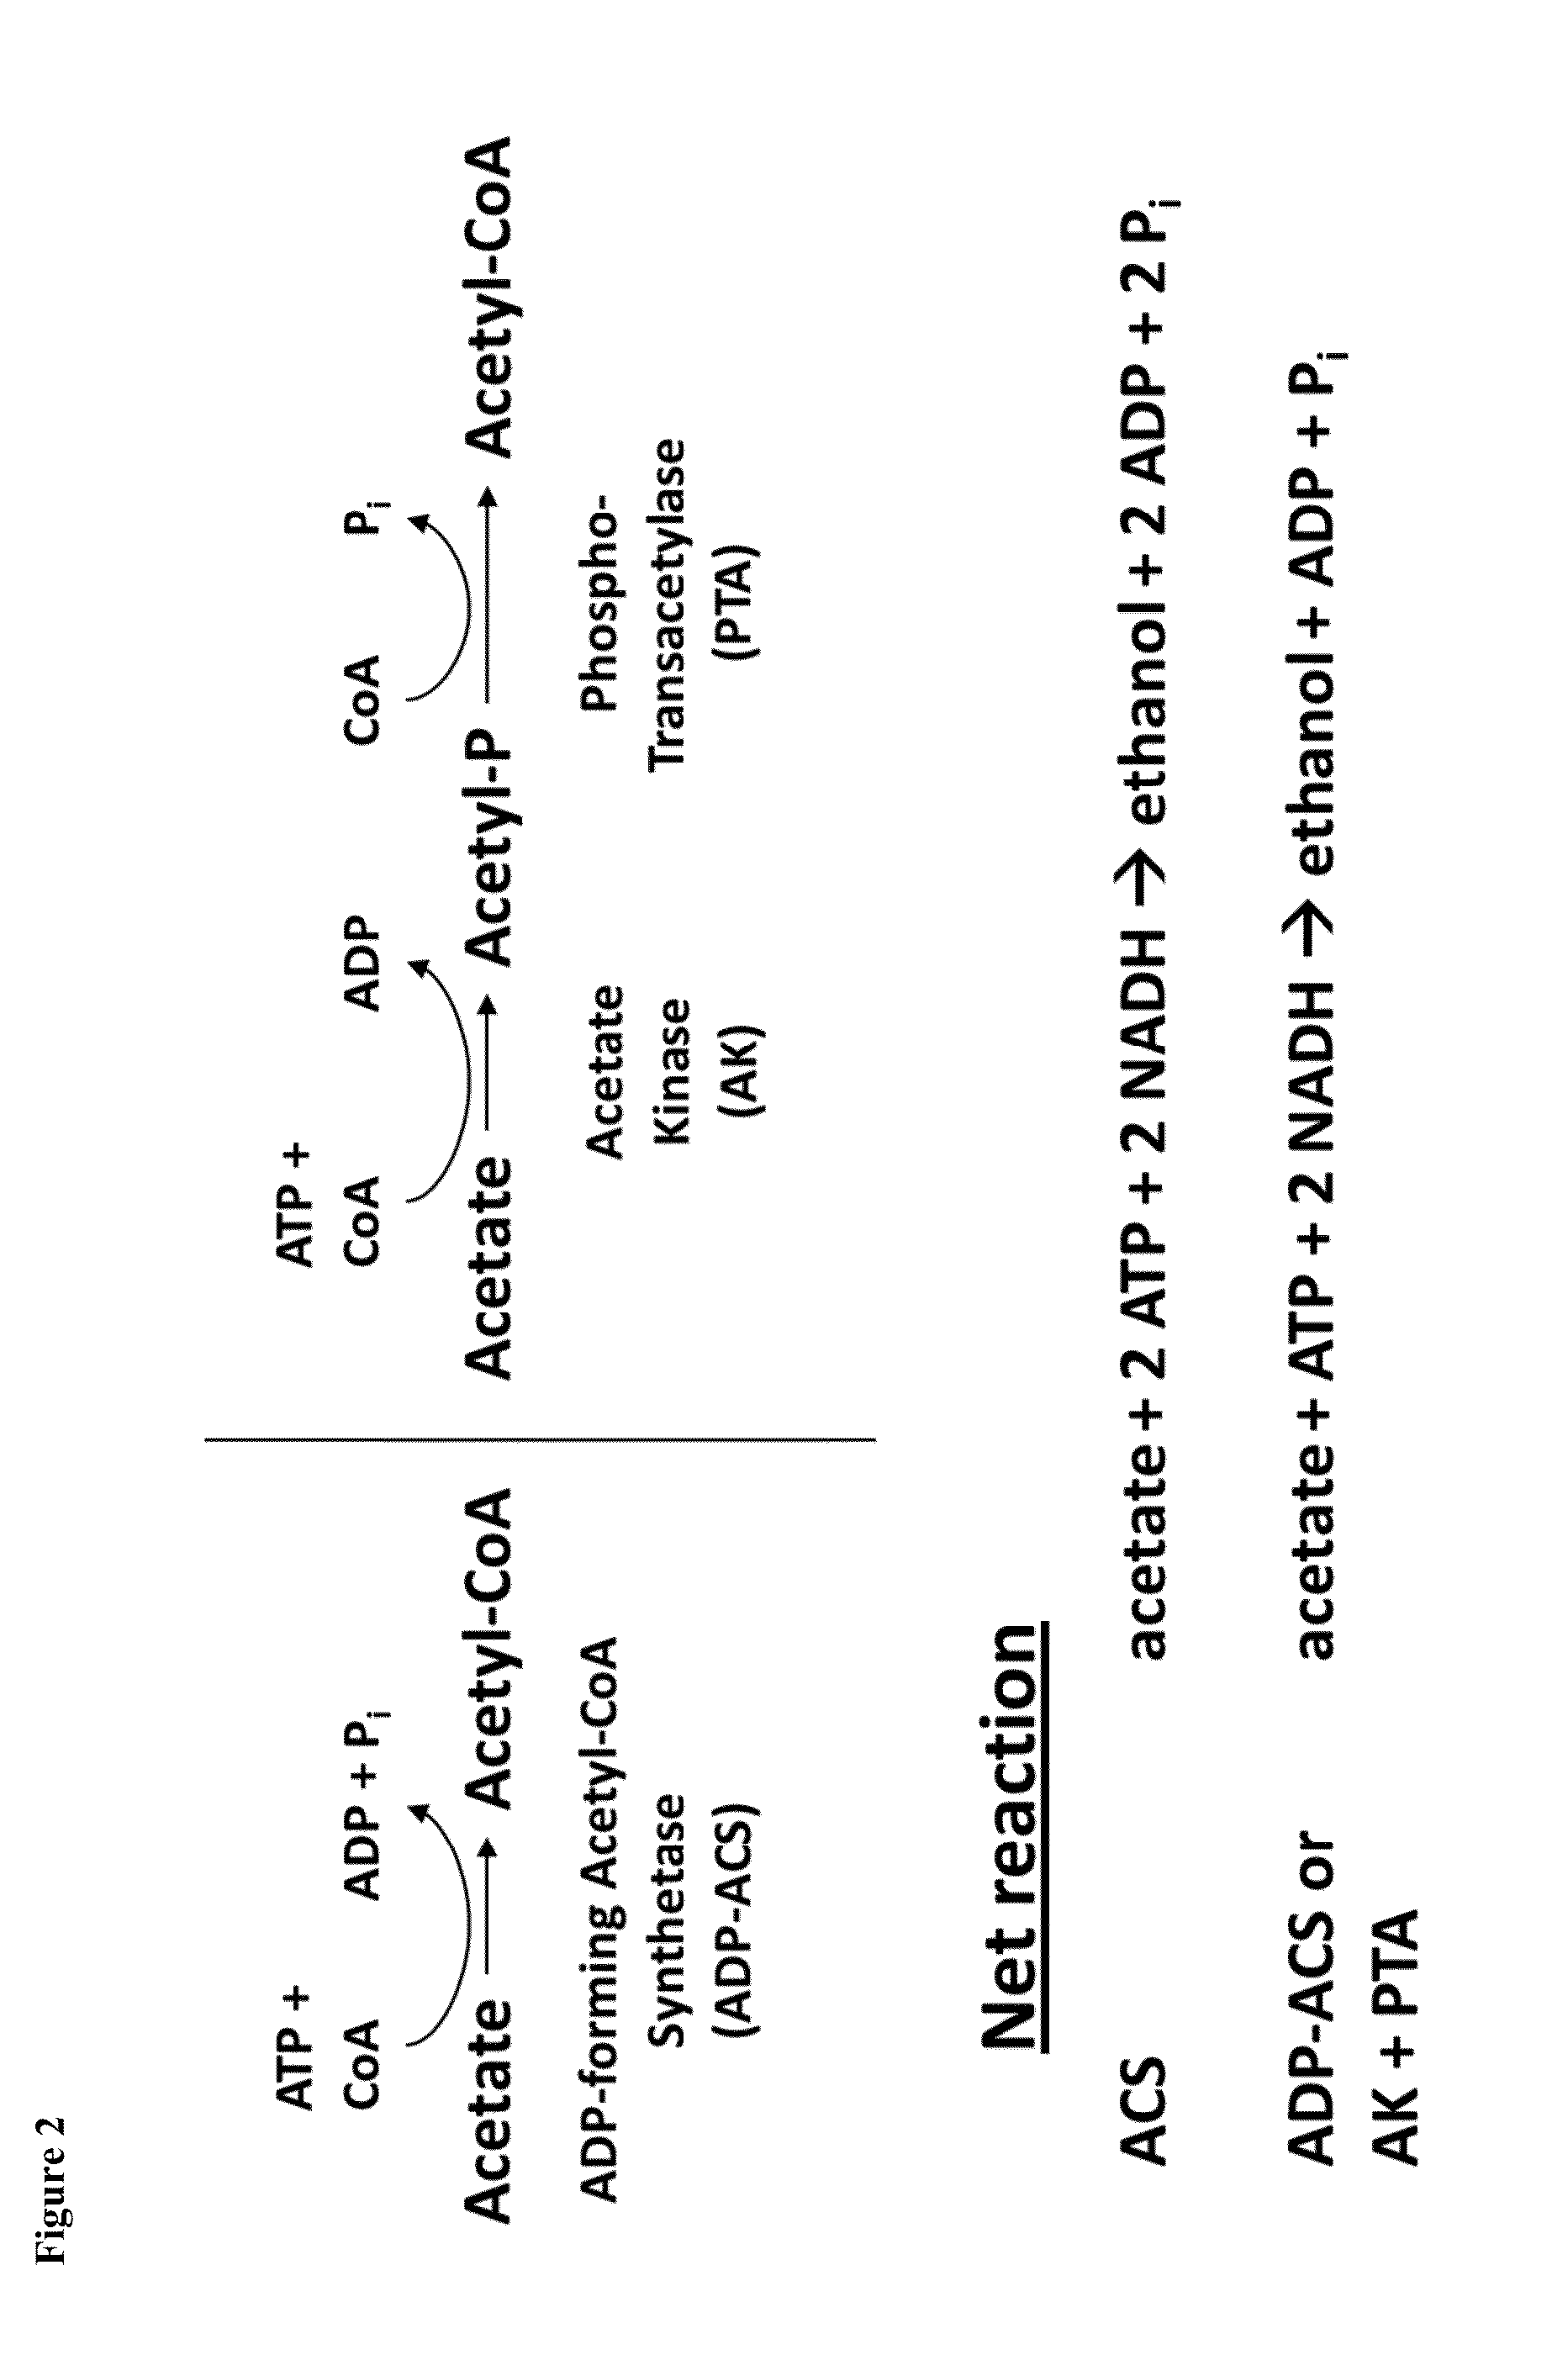 Method for Acetate Consumption During Ethanolic Fermentaion of Cellulosic Feedstocks